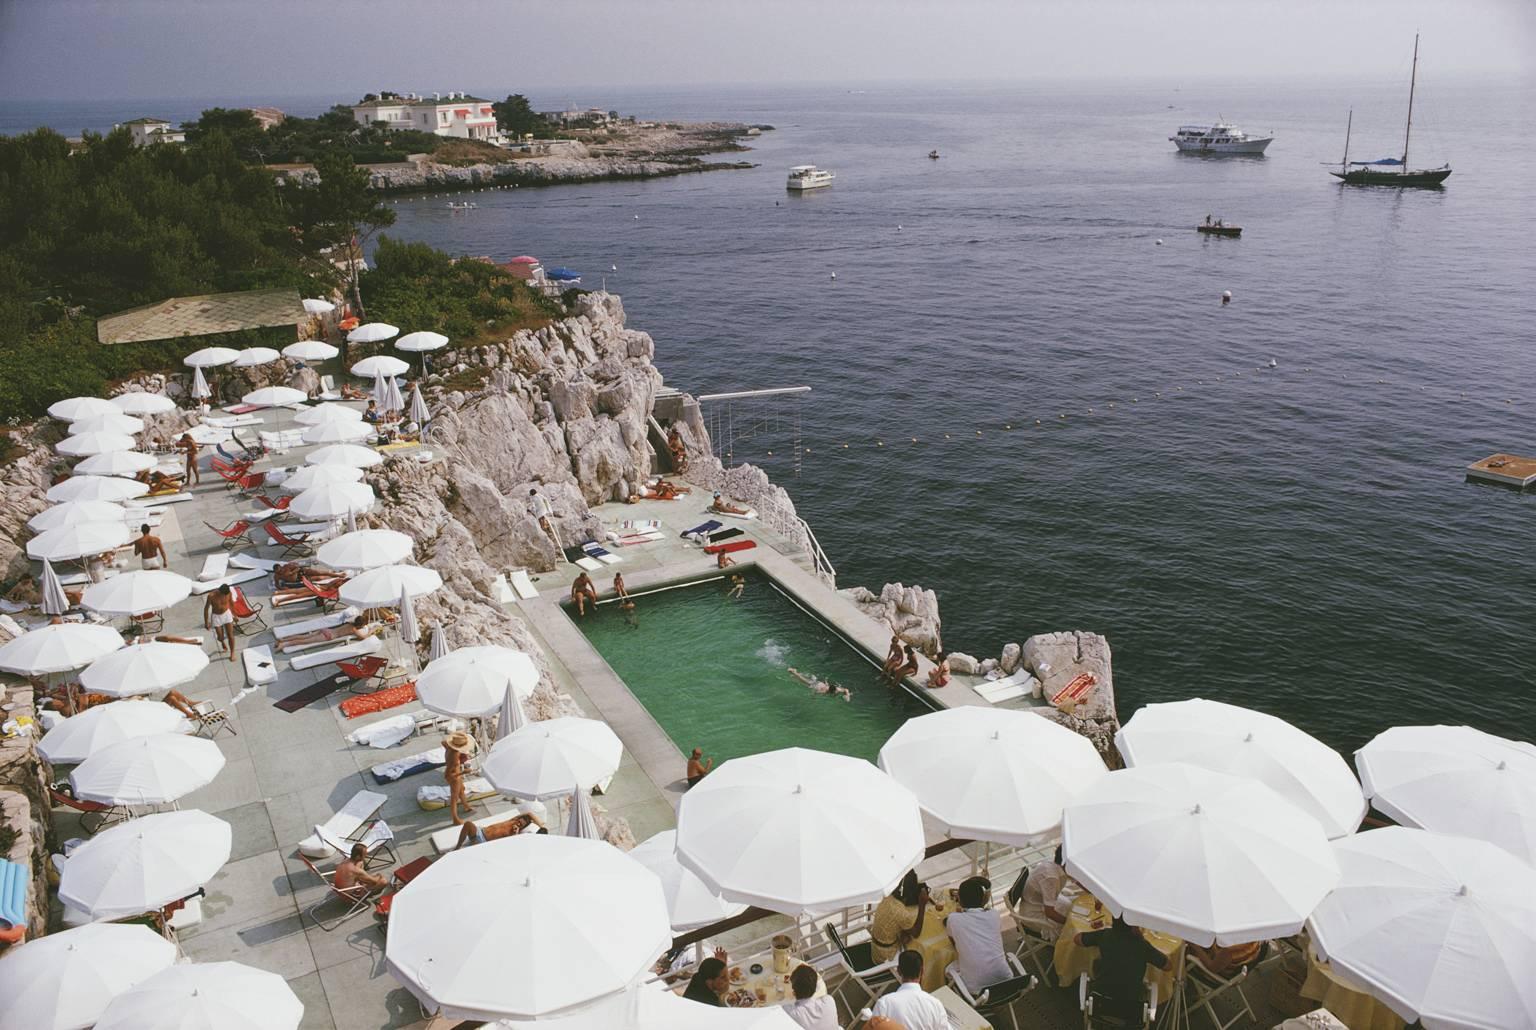 'Pool By The Sea' by Slim Aarons

Guests and white umbrellas / parasols around the swimming pool at the infamously glamorous Hotel du Cap Eden-Roc, Antibes, France, August 1969 next to the sea. (Photo by Slim Aarons)

Another typically 'Slim